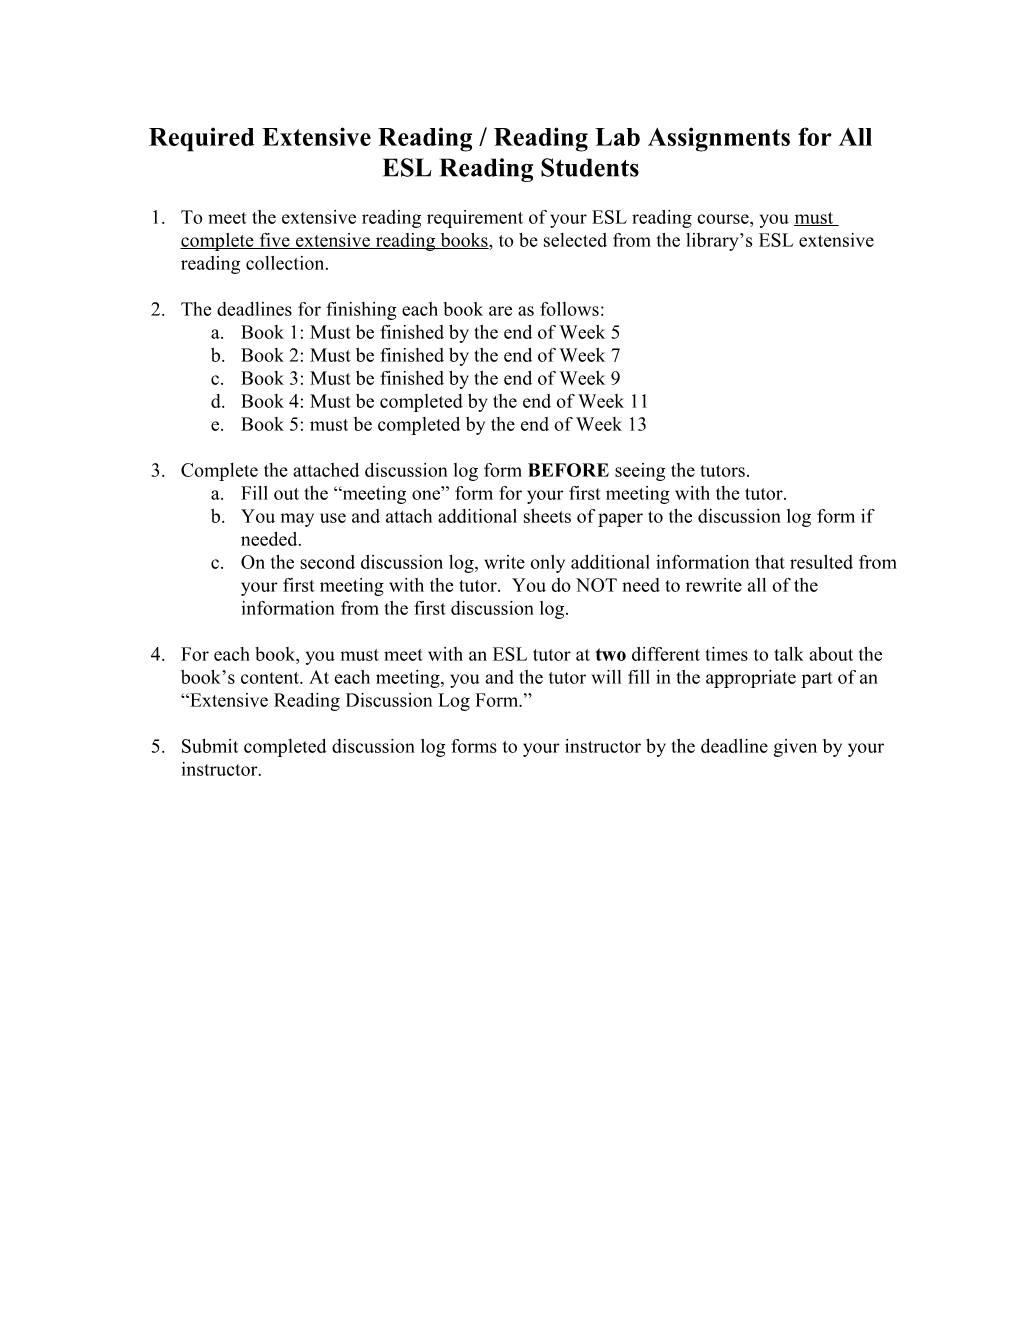 Required Extensive Reading / Reading Lab Assignments for All ESL Reading Students